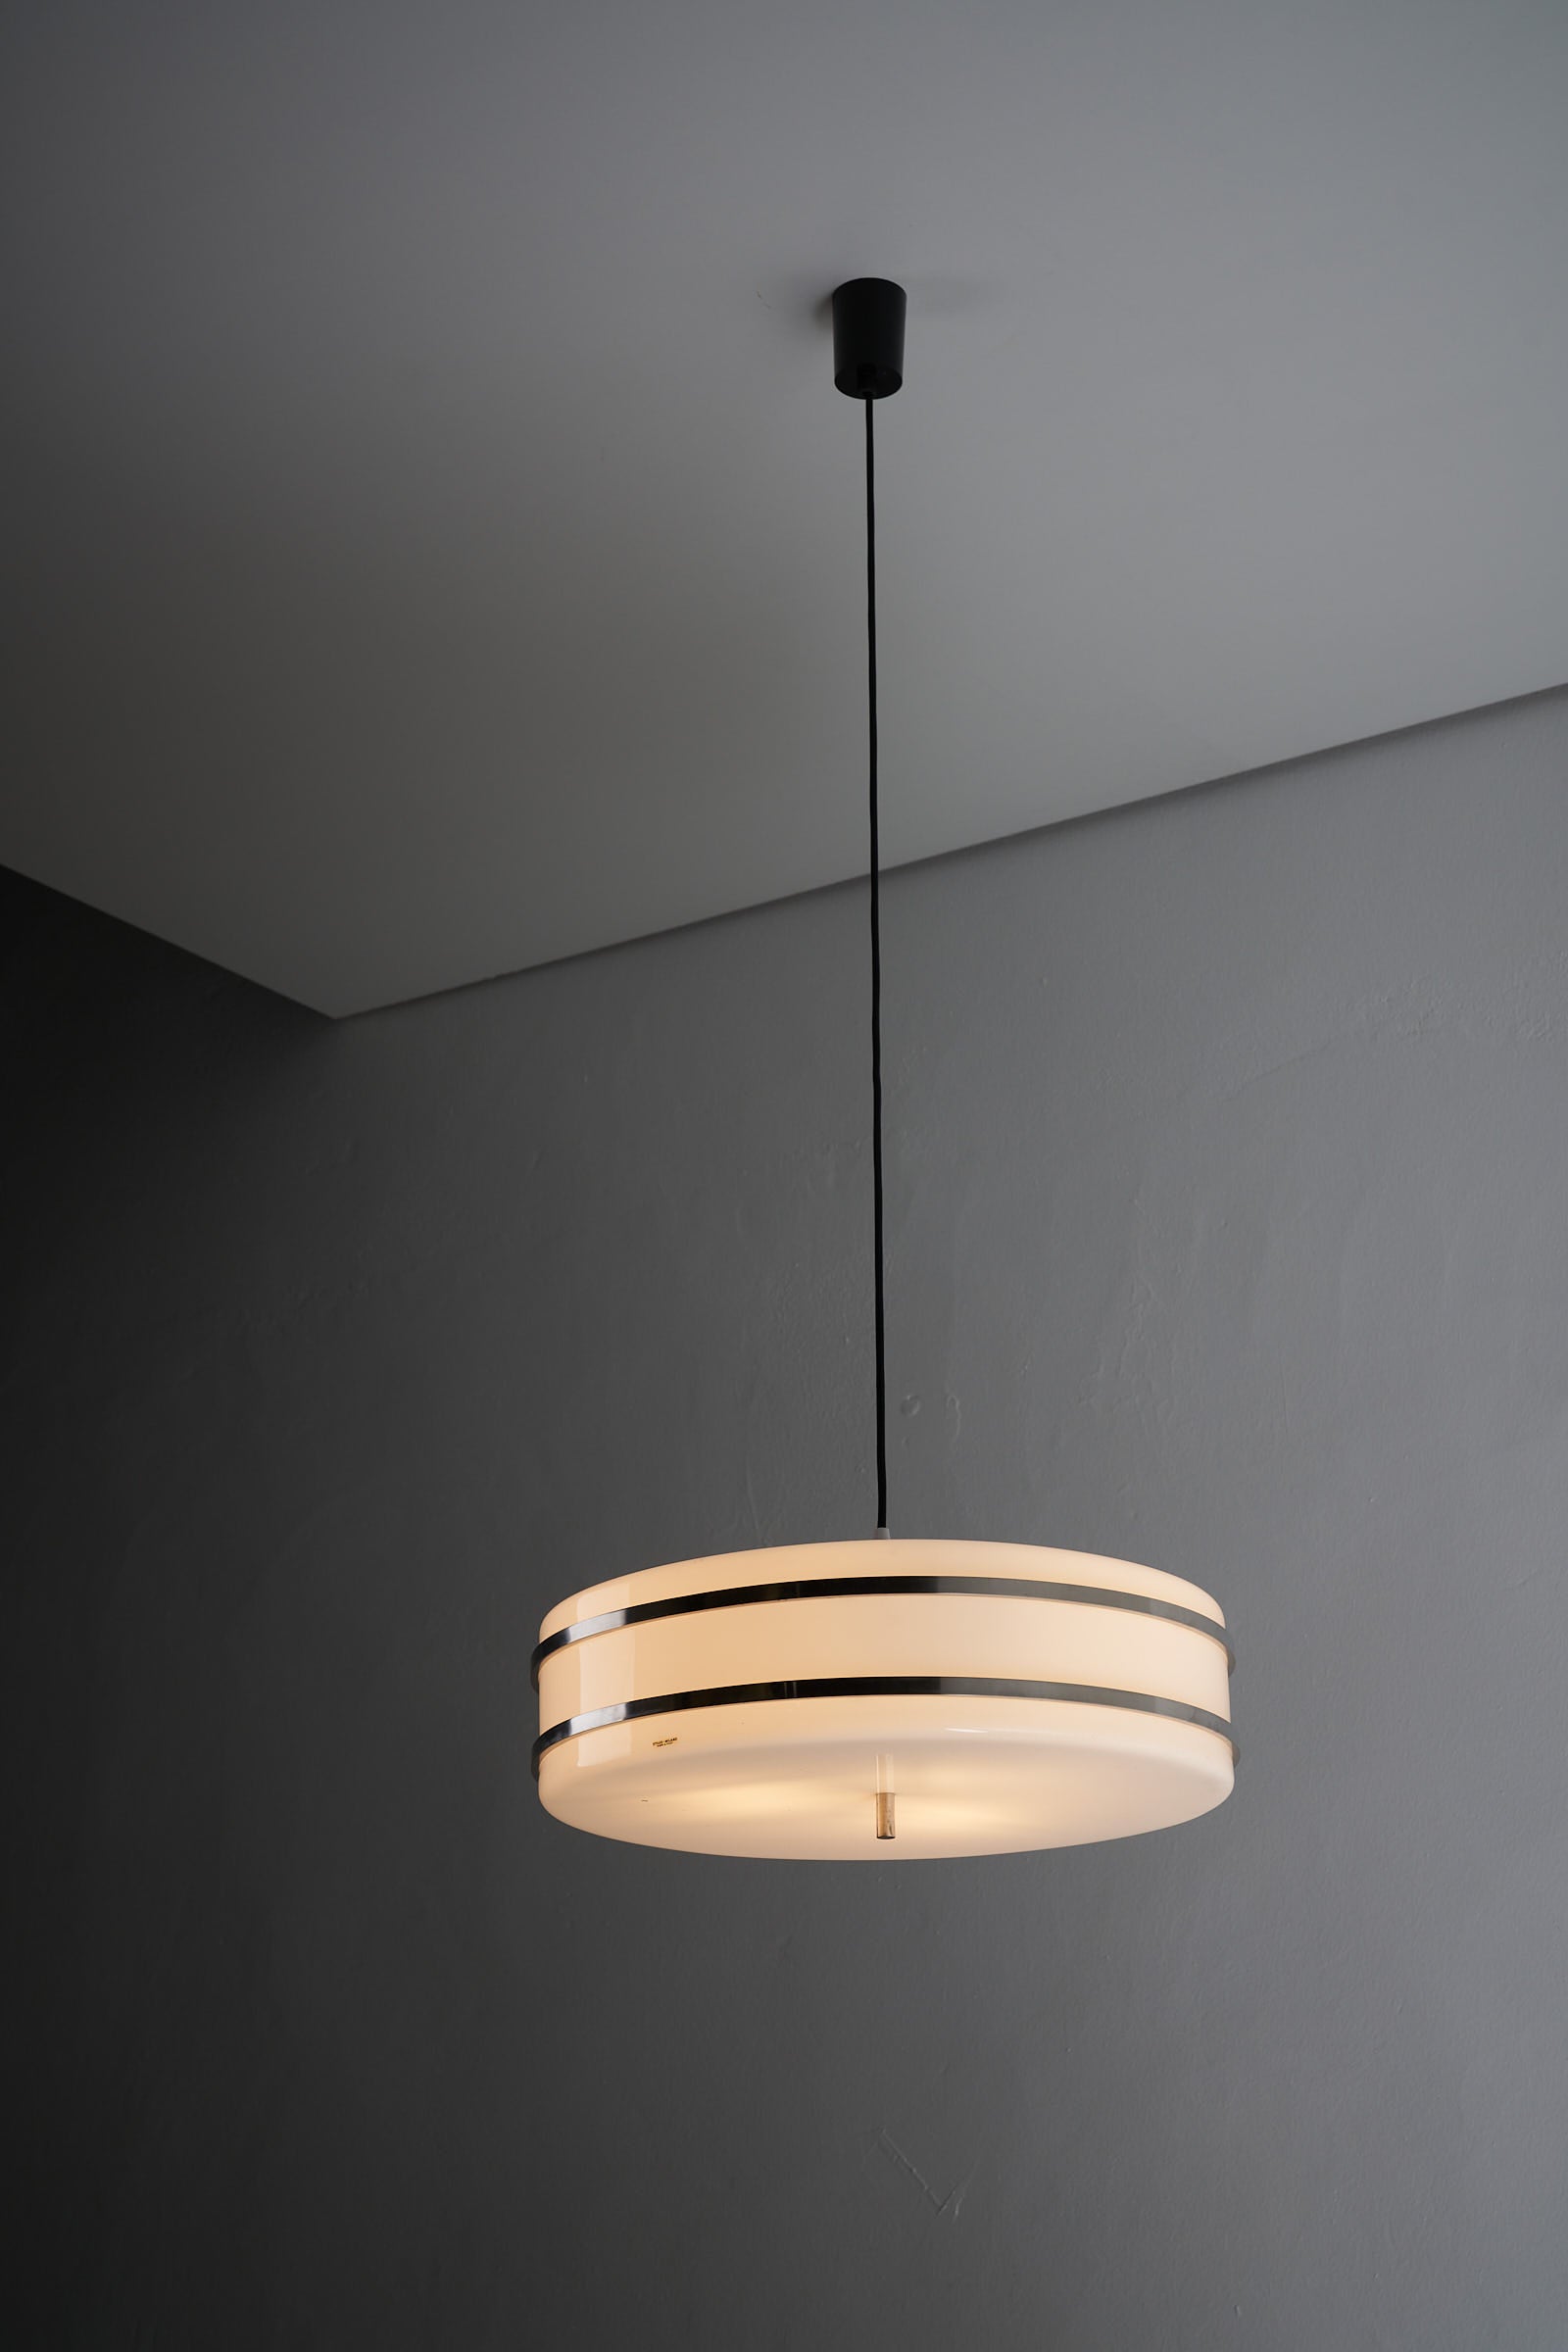 Circular pendant light by Stilux Milano with a flat cylindrical plexiglass form, chromed steel accents, and a repainted black exterior.